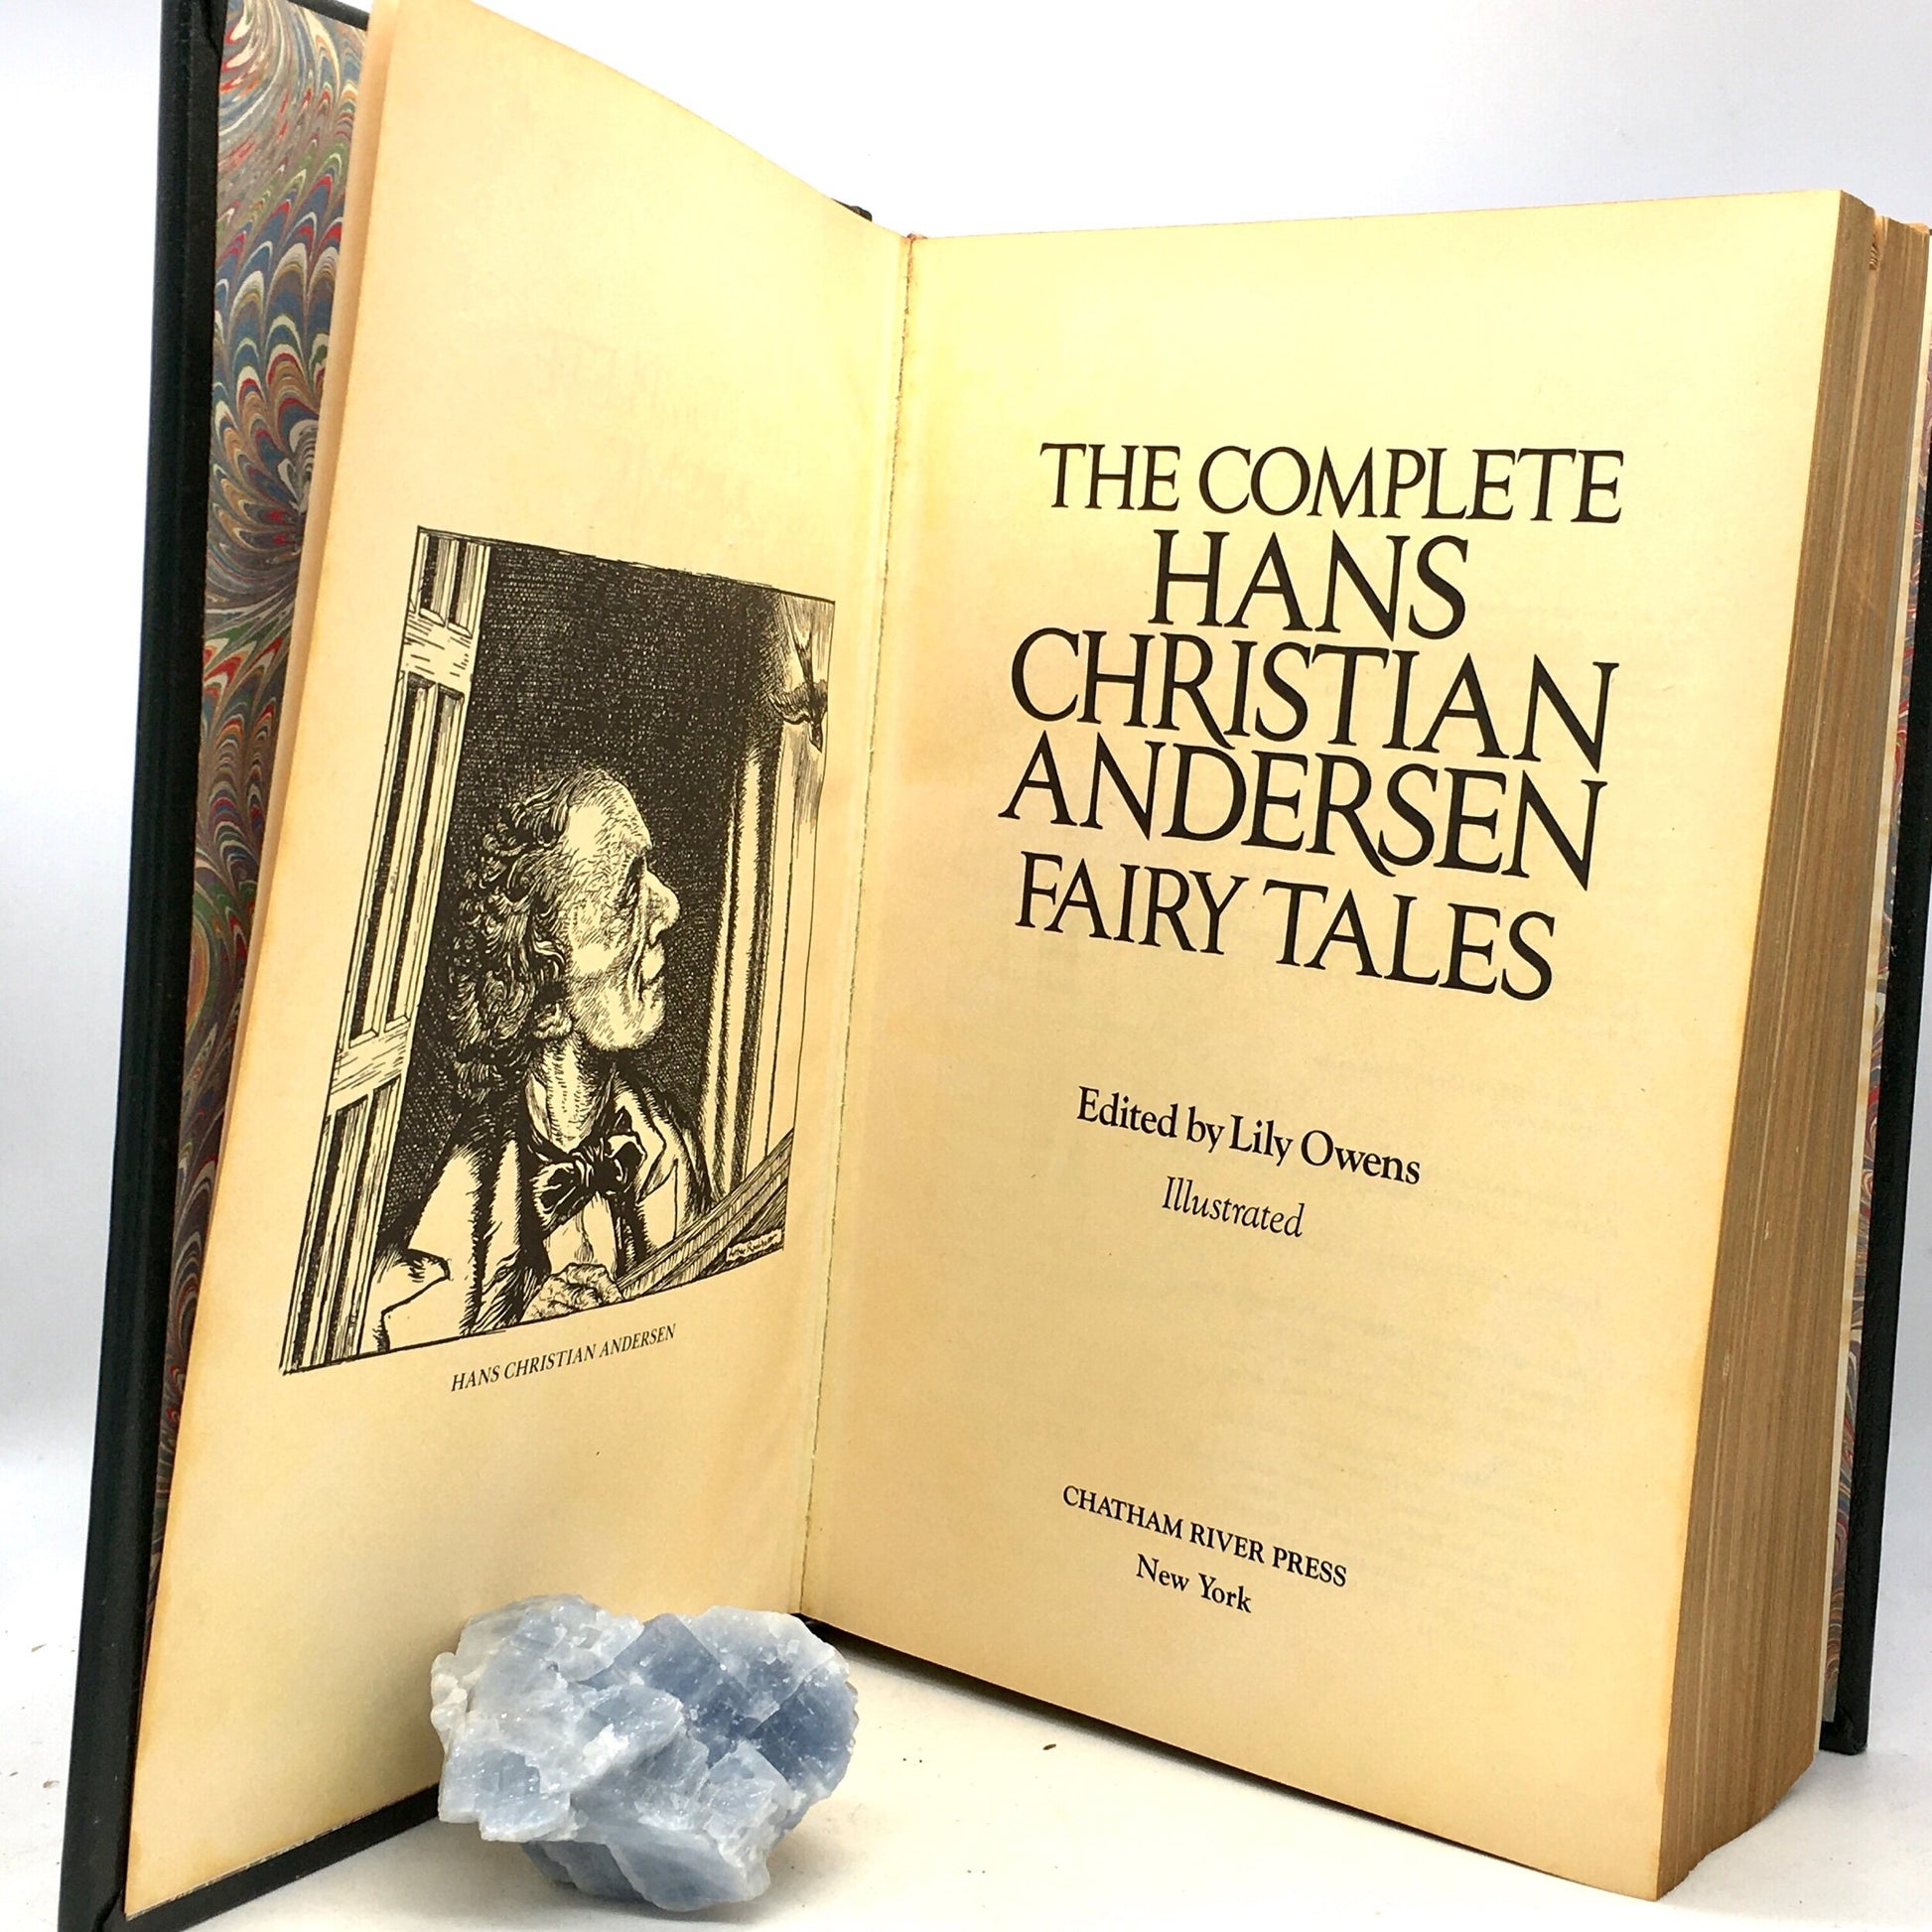 ANDERSEN, Hans Christian "The Complete Fairy Tales" [Chatham River Press, 1981] - Buzz Bookstore